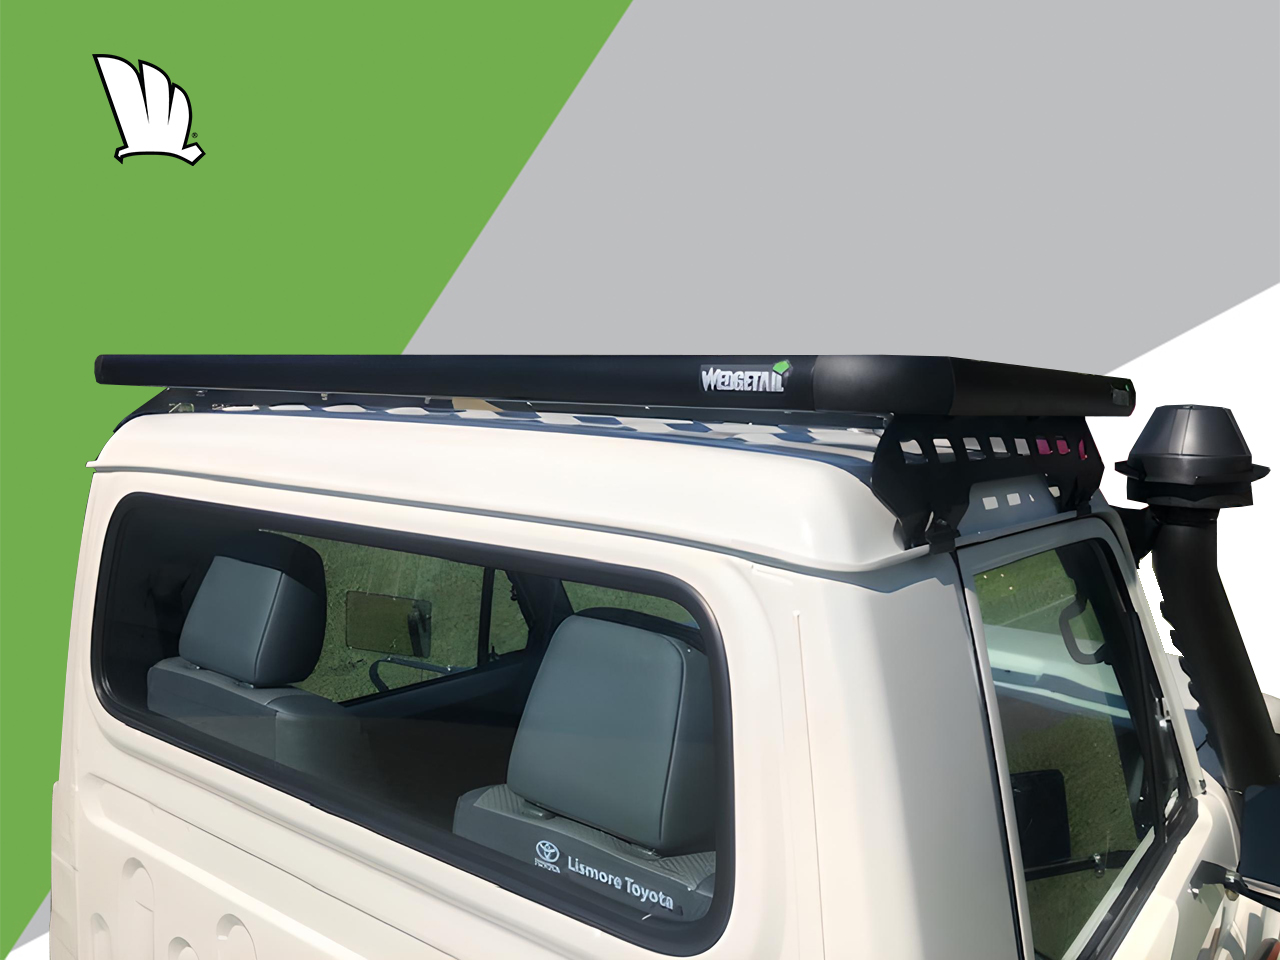 High view of the cabin of a Toyota LandCruiser 79 Series dual cab with a Wedgetail roof rack installed on the cabin showing clearly the five cross bars used to make it super strong and the one piece mounting rails supporting the roof rack platform.